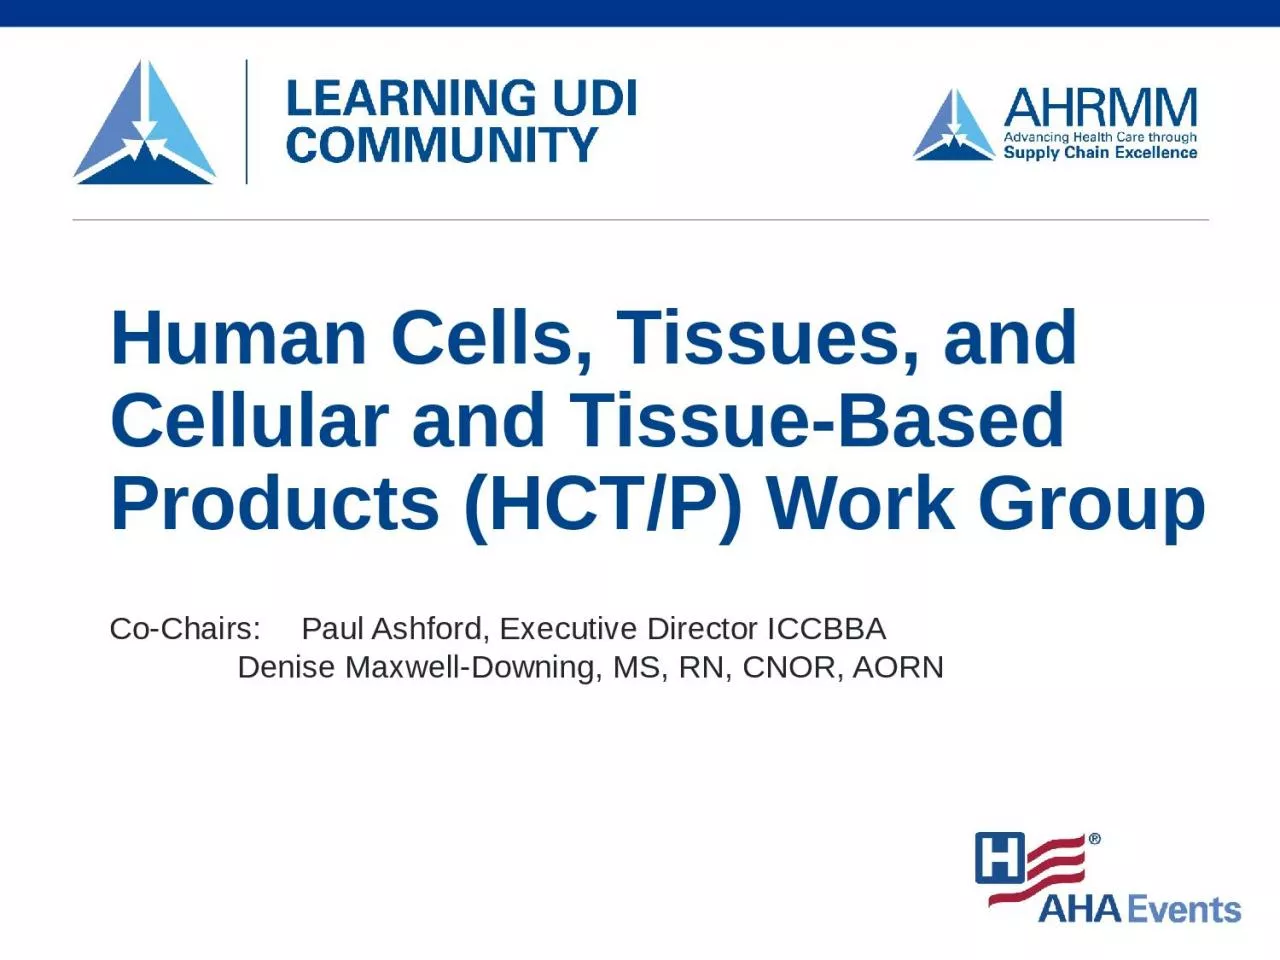 Human Cells, Tissues, and Cellular and Tissue-Based Products (HCT/P